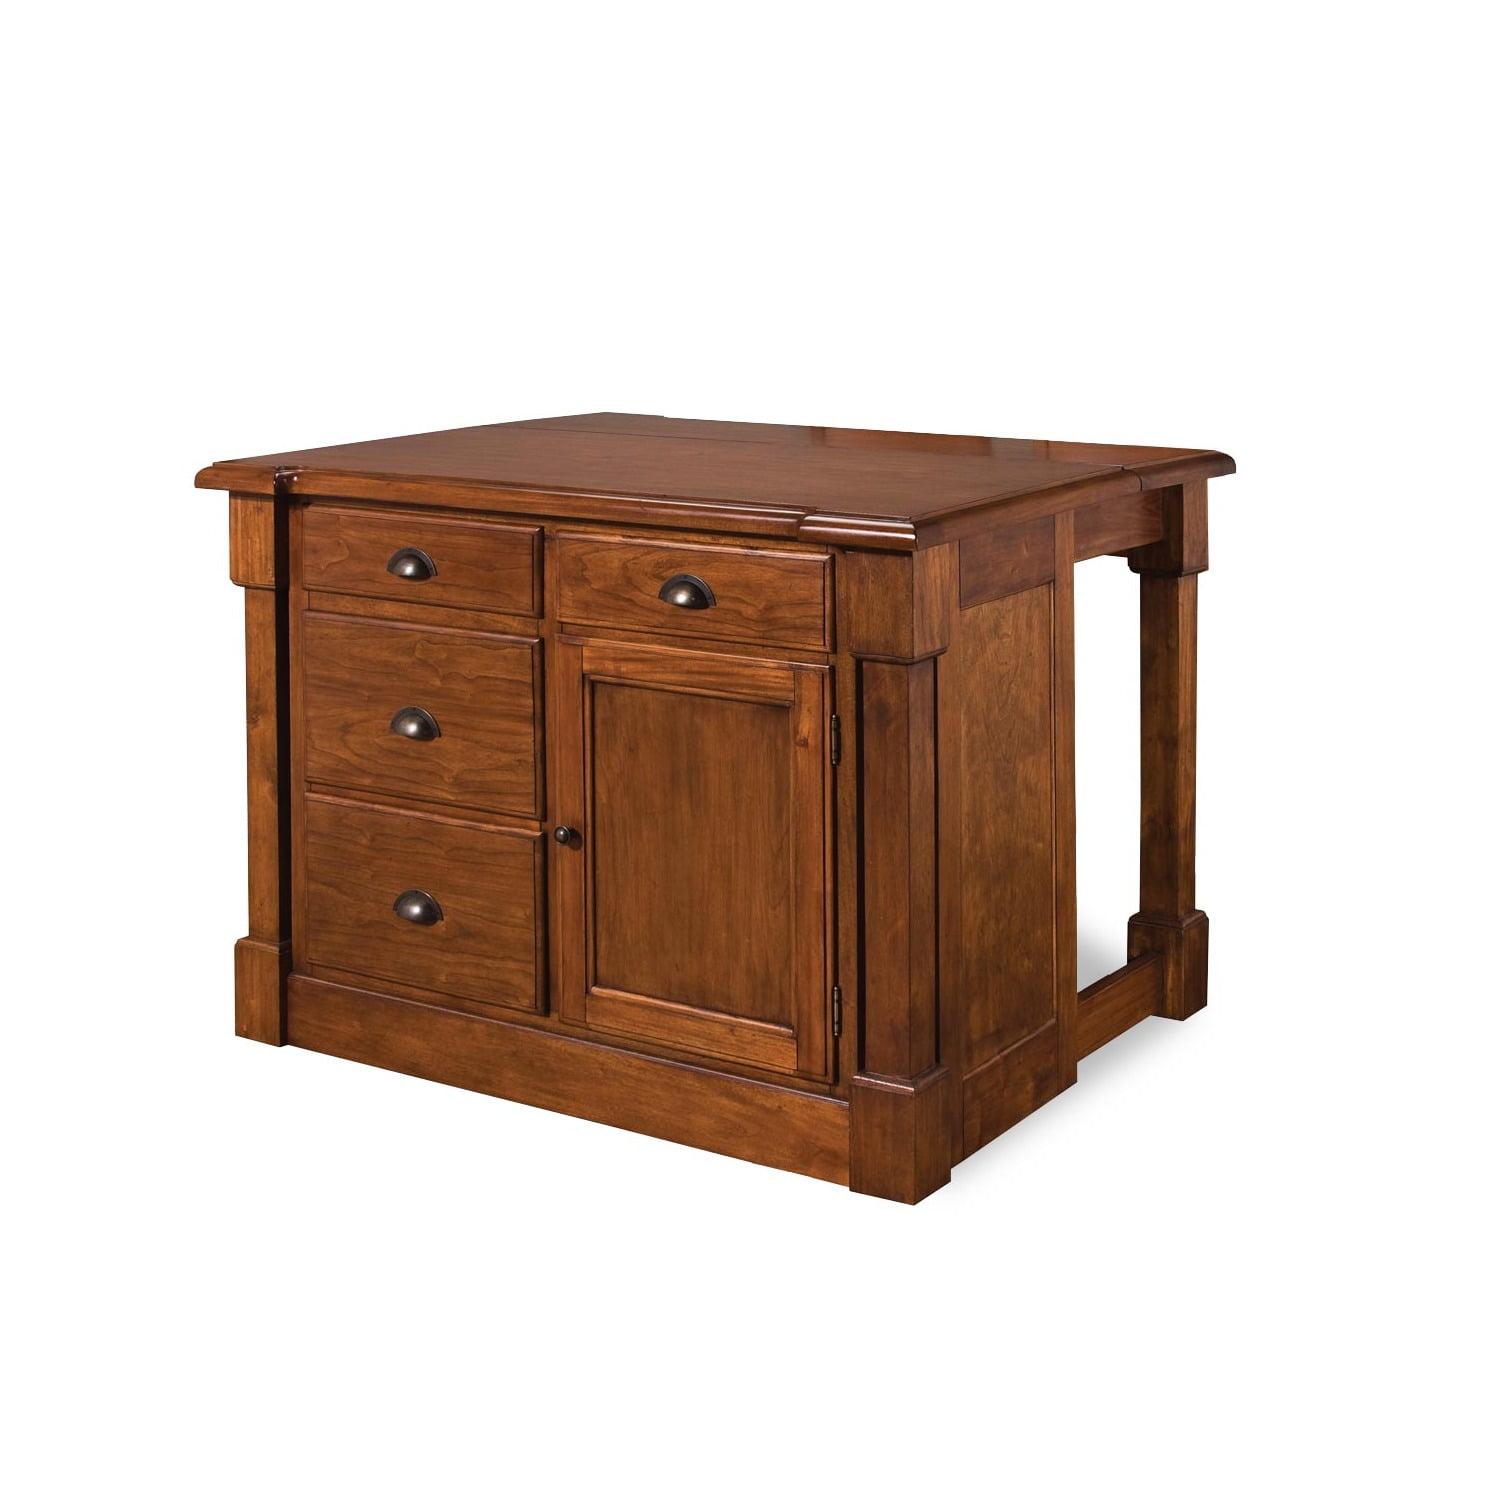 Rustic Cherry Mahogany Expandable Kitchen Island with Brass Hardware